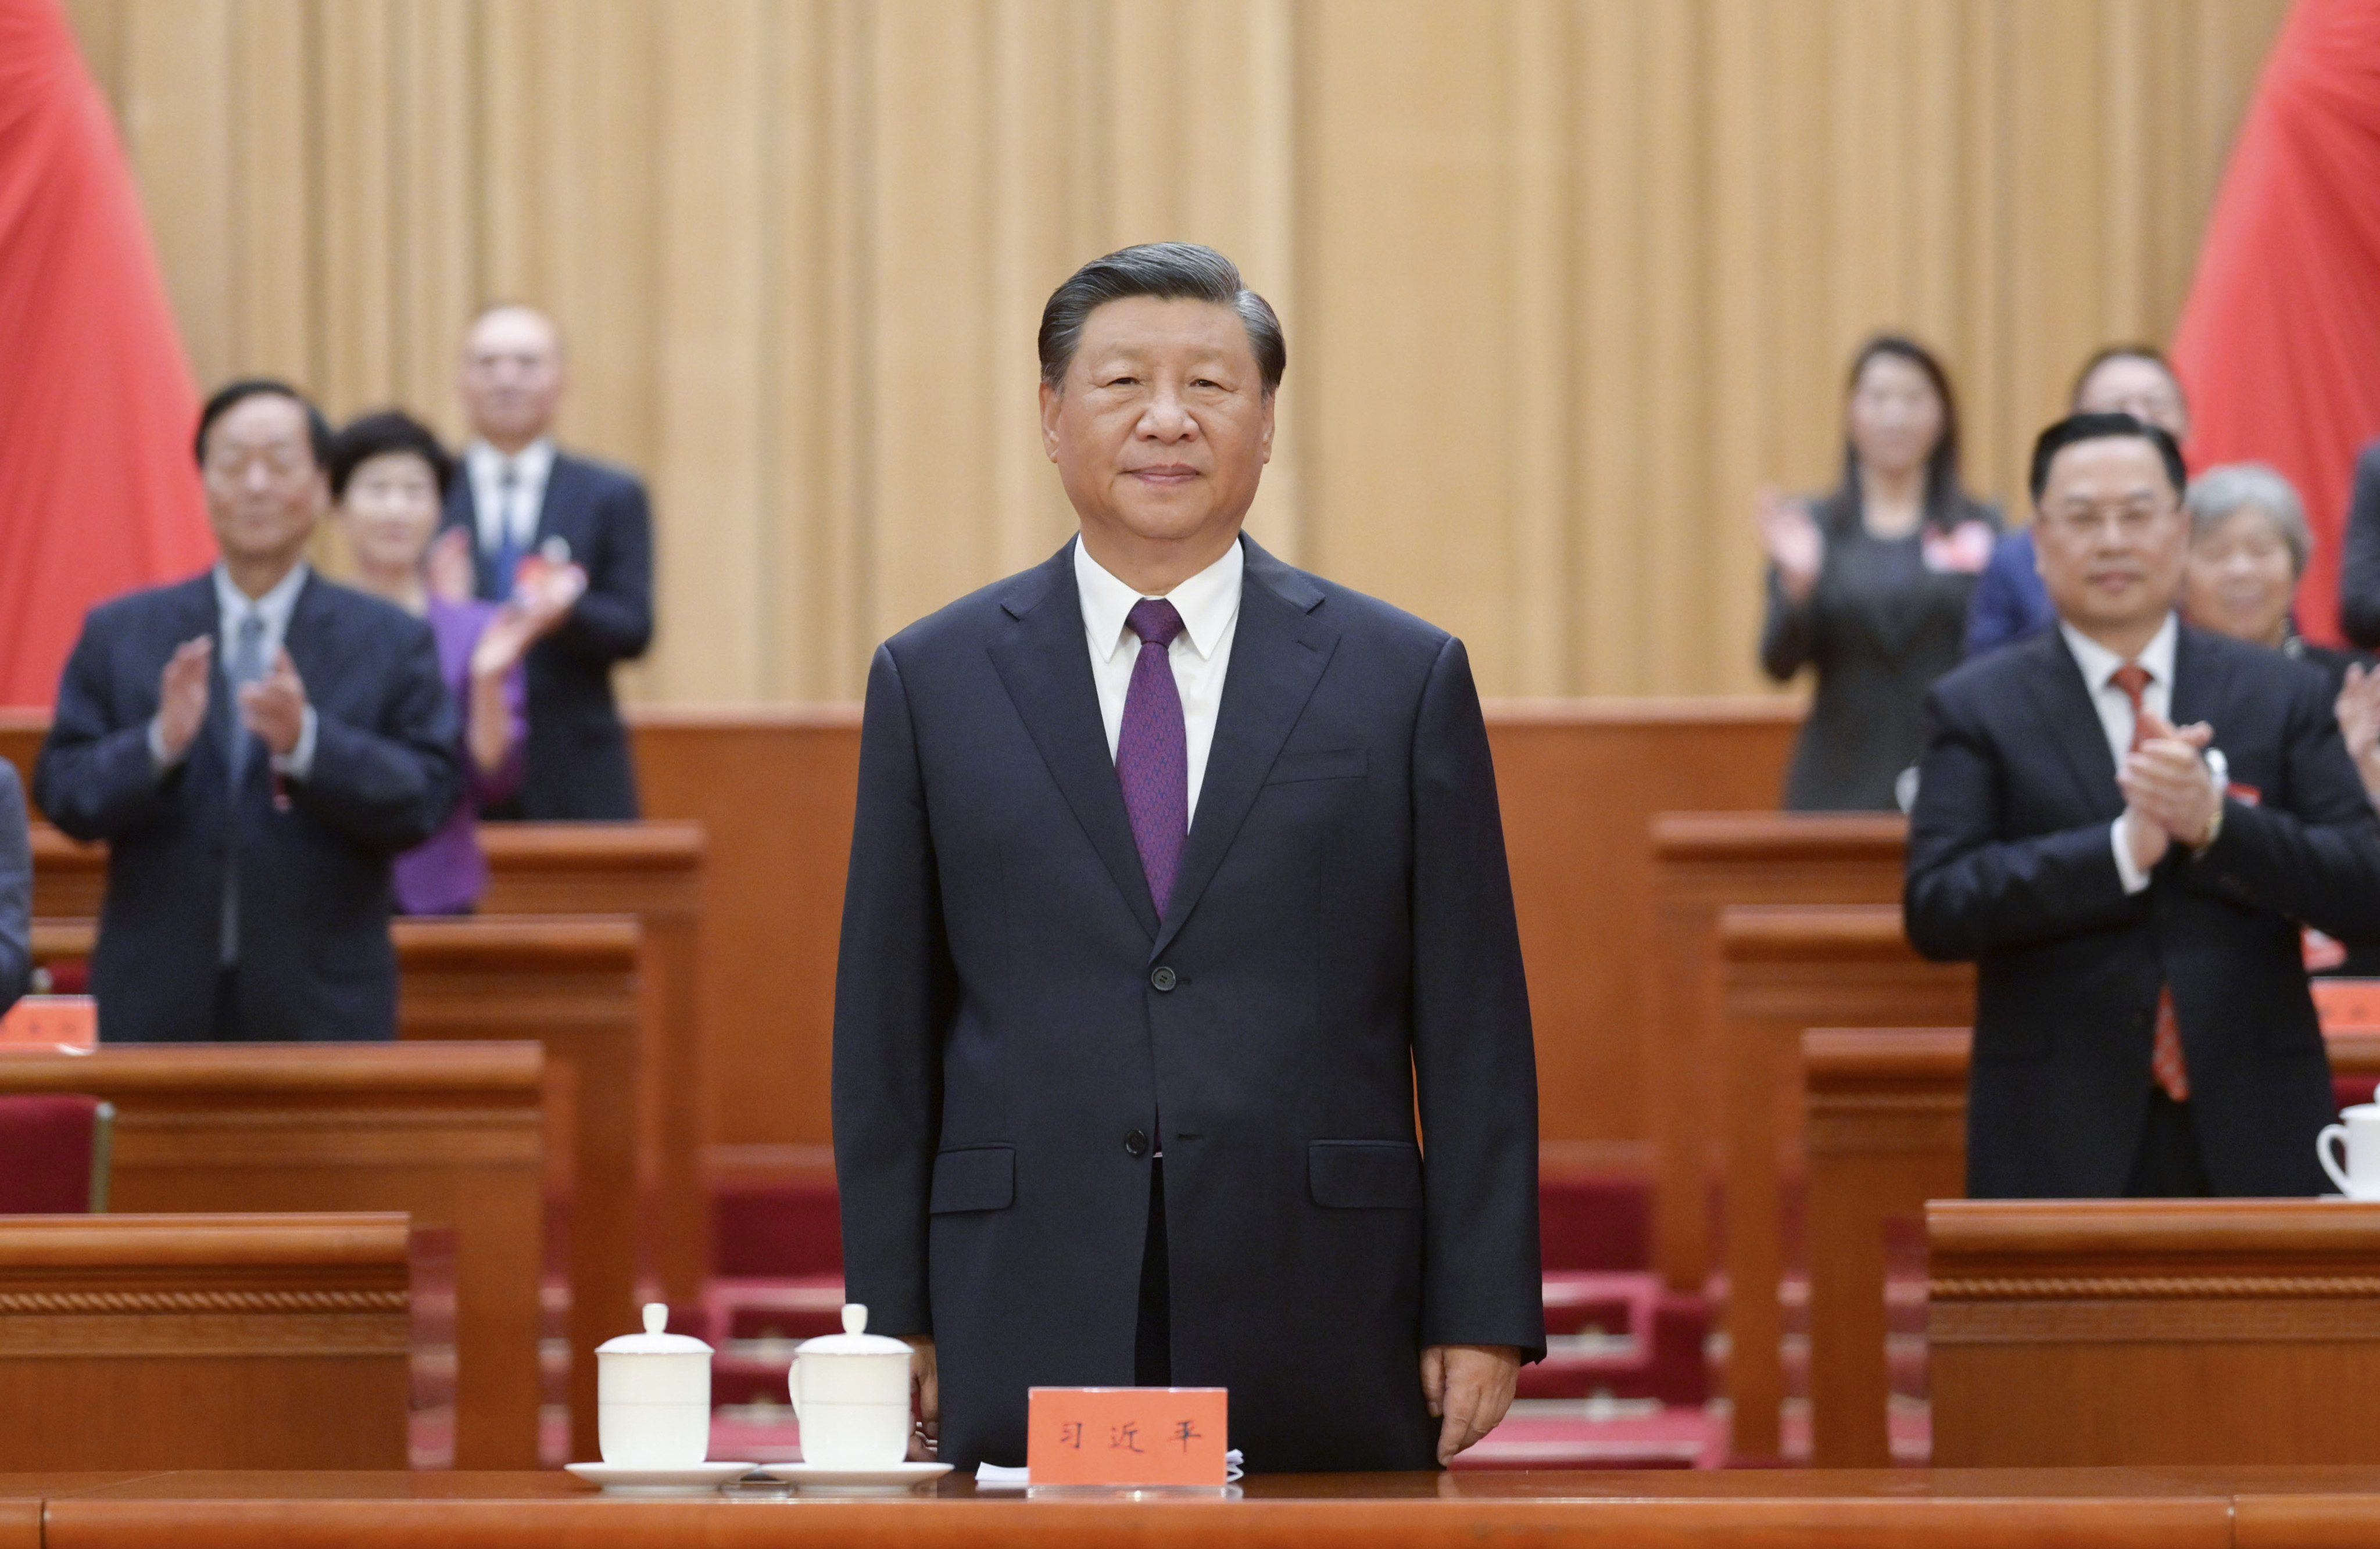 Chinese President Xi Jinping attends the opening ceremony of the 11th national congress of returned overseas Chinese and their relatives at the Great Hall of the People in Beijing on Thursday. Photo: Xinhua